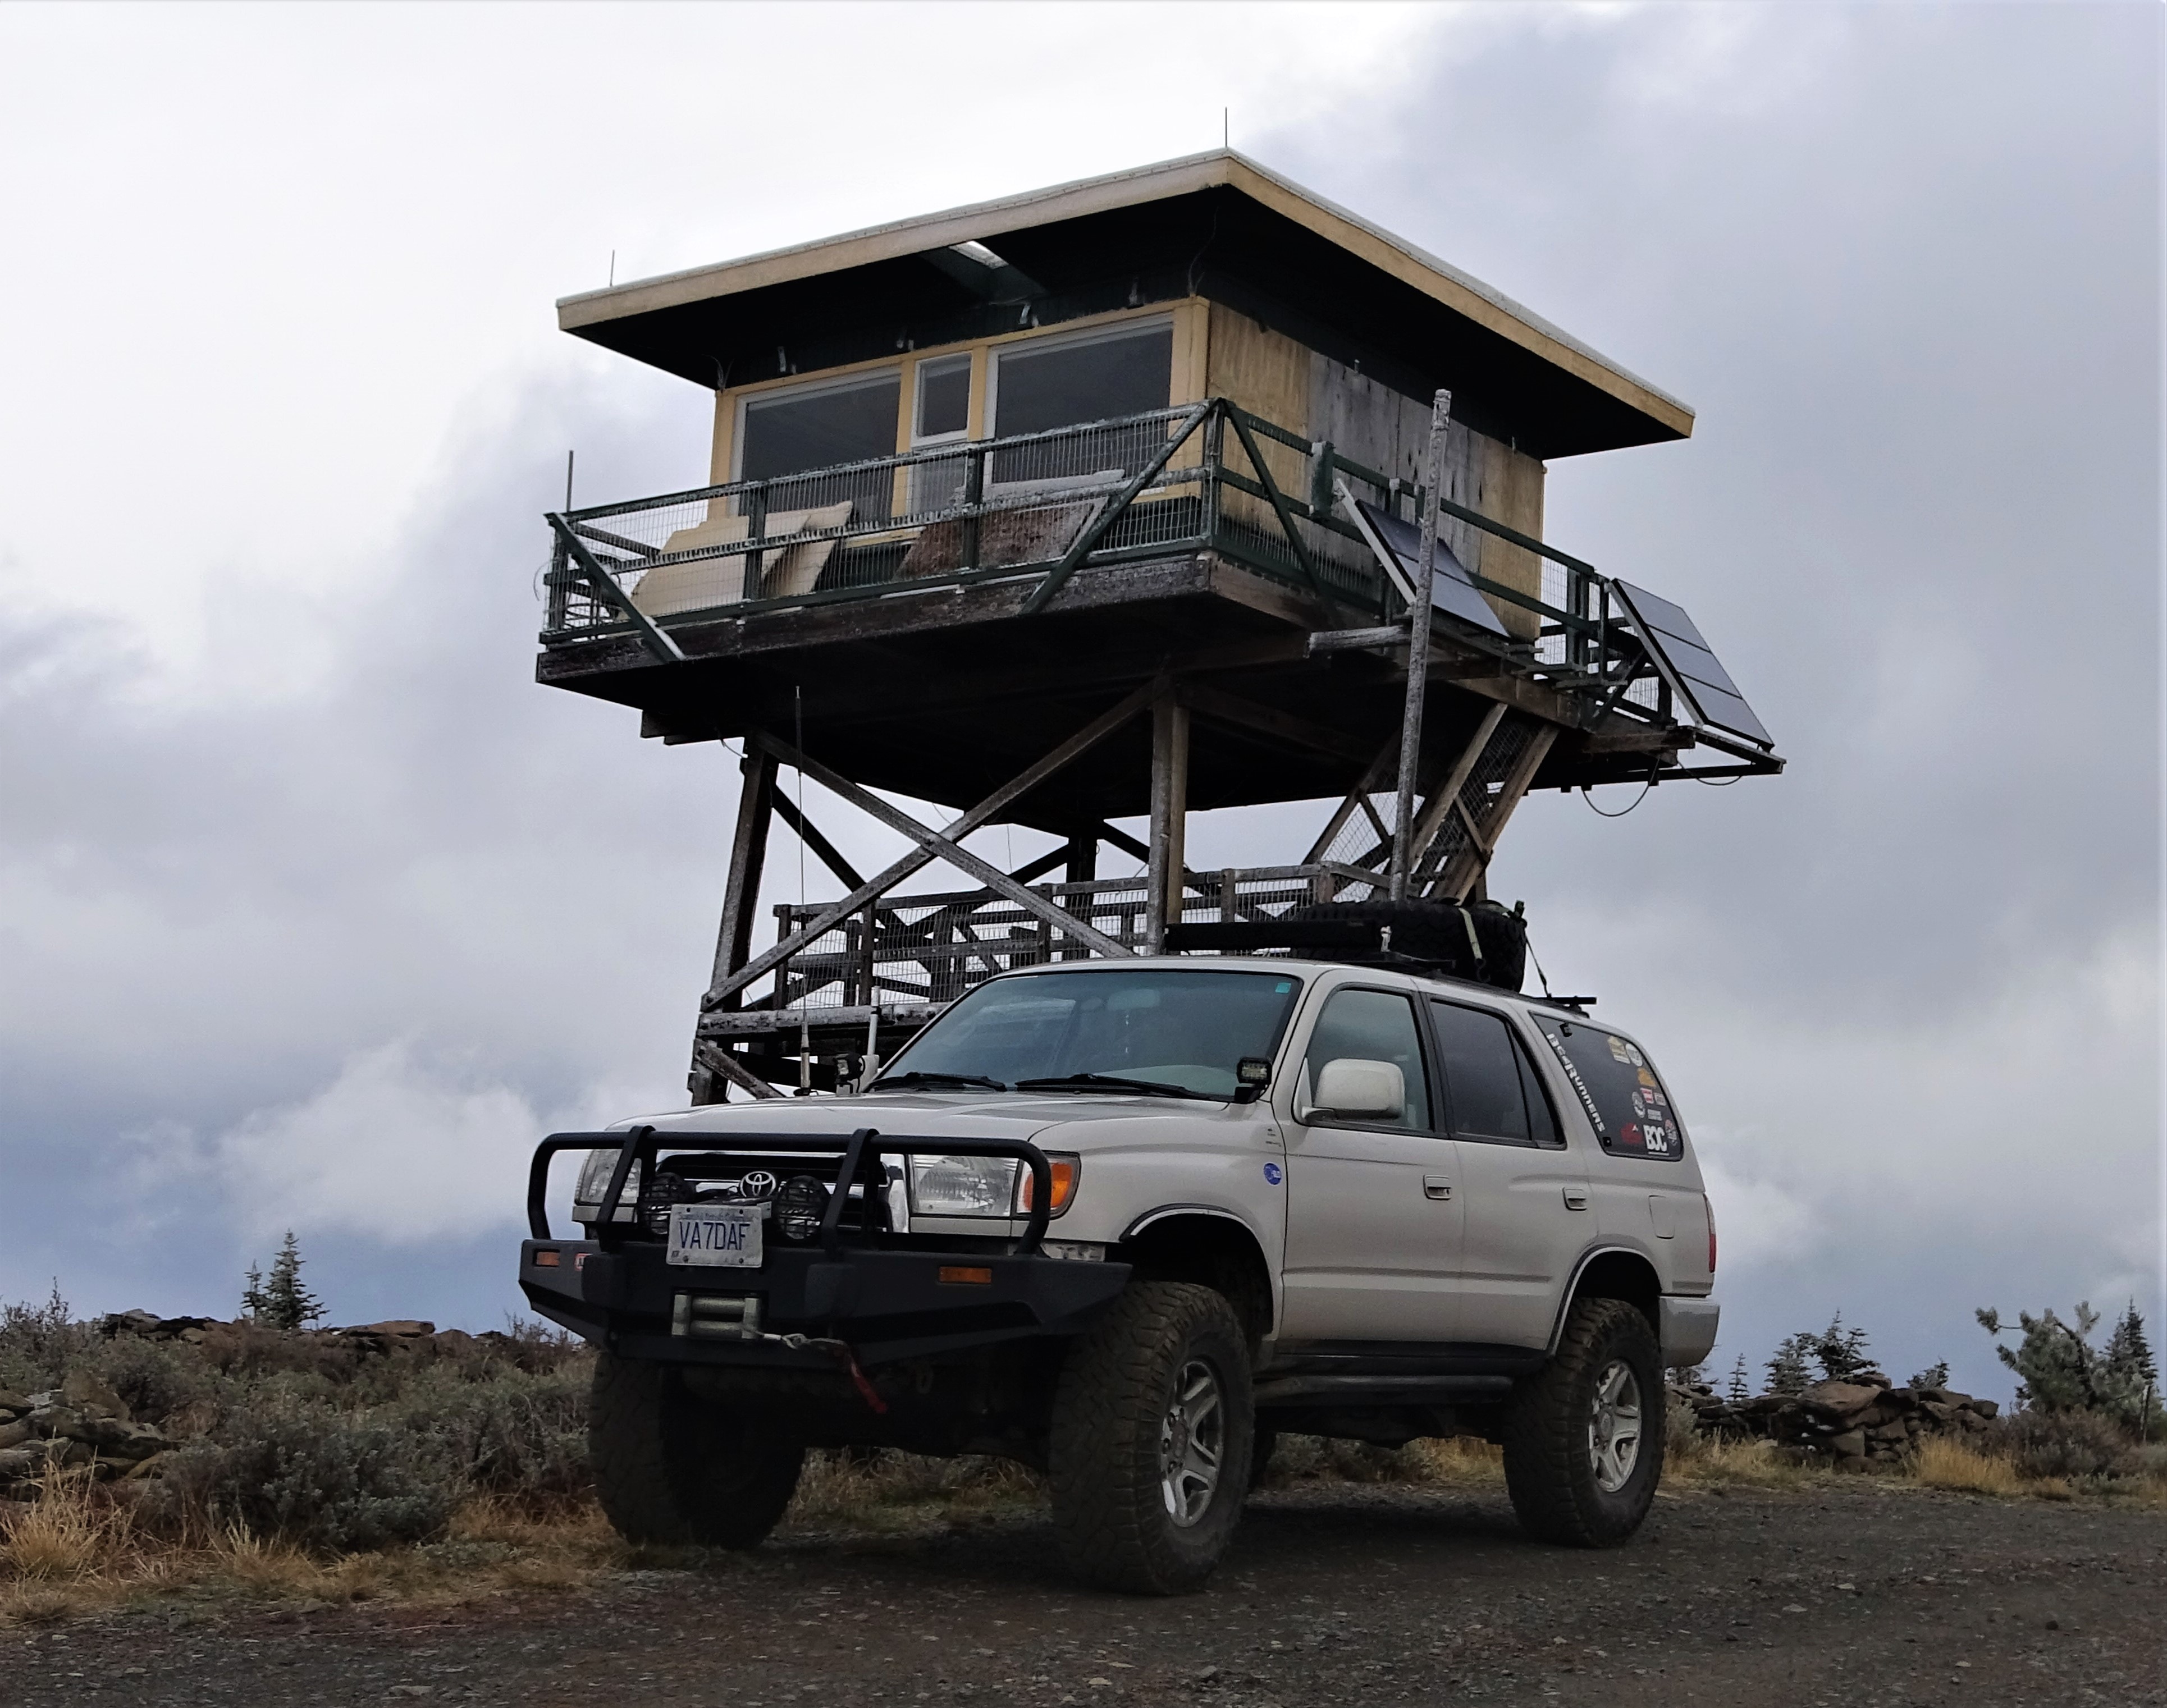 Read more about the article Oregon Adventure.